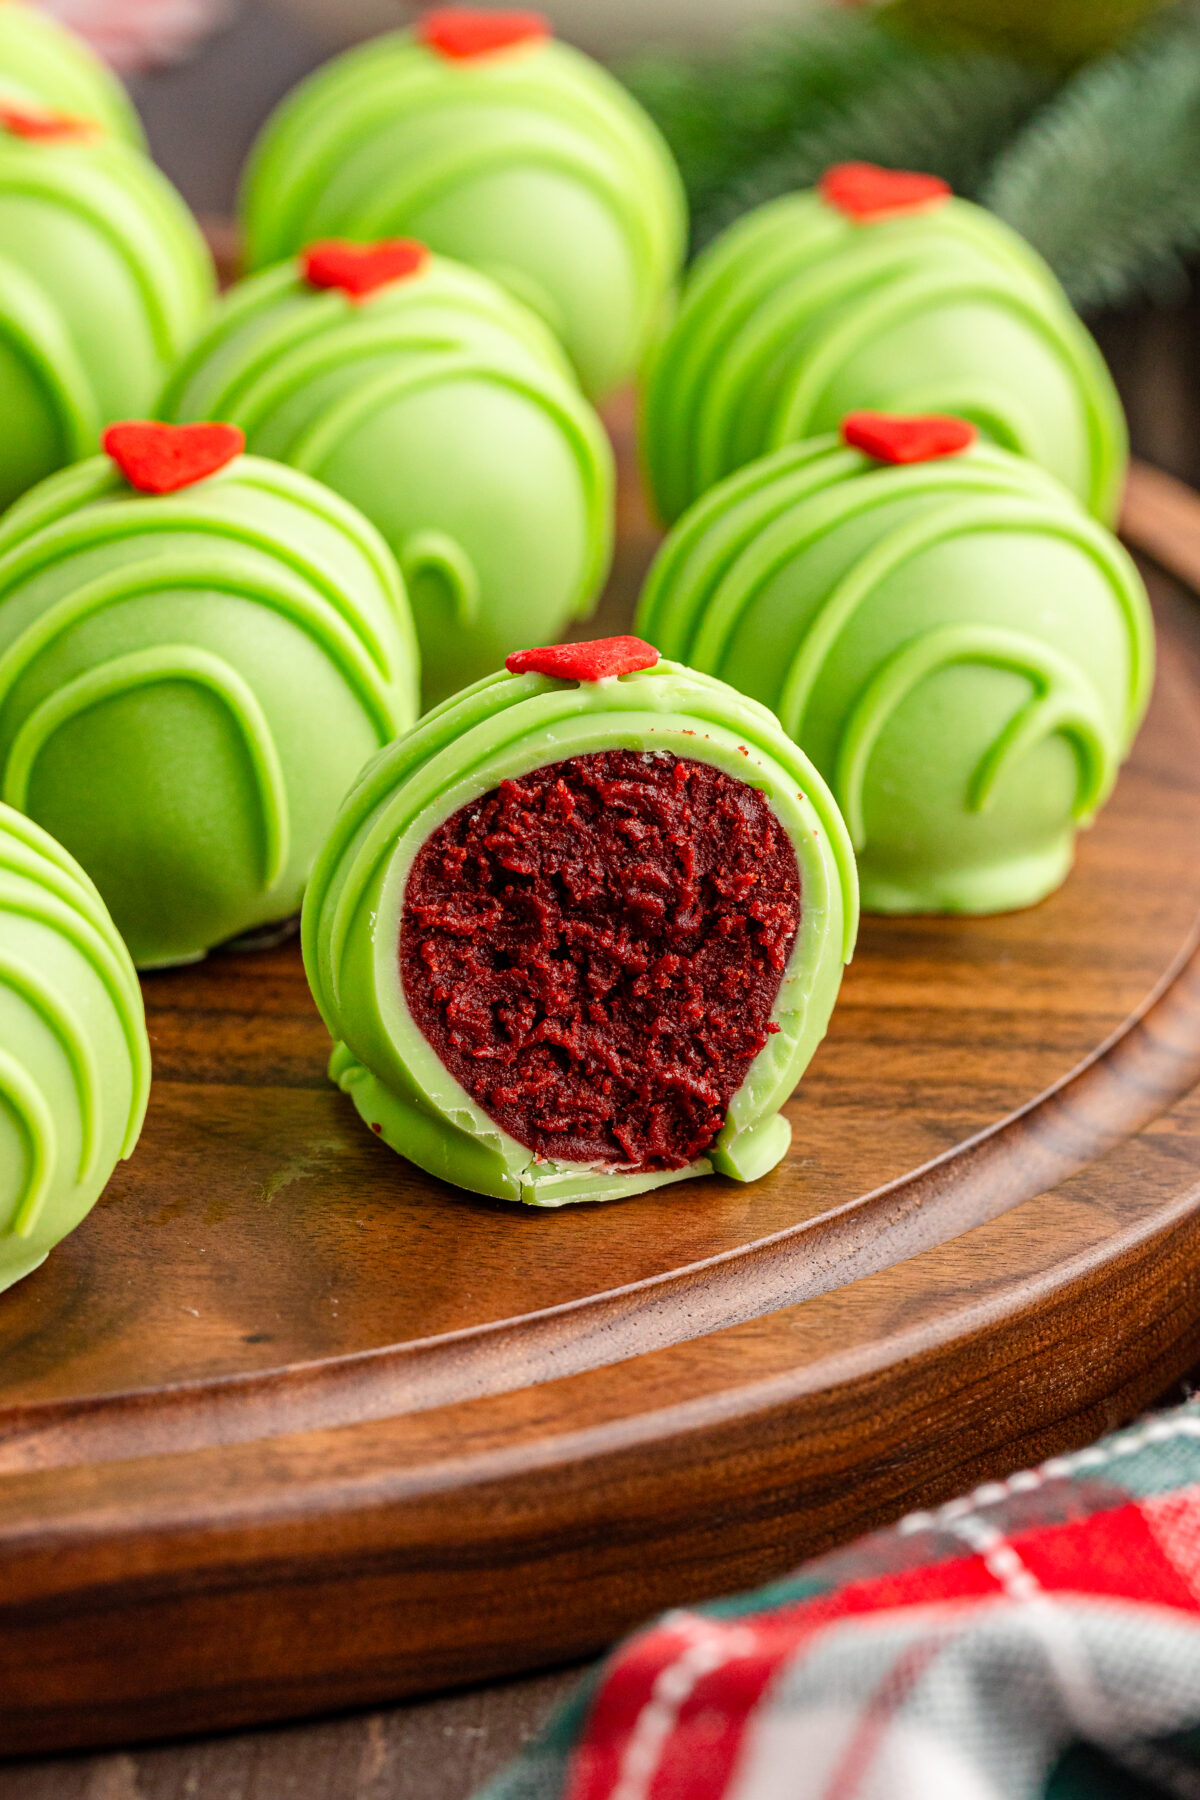 Forget about the Grinch stealing Christmas, these Grinch Oreo balls will steal the hearts of your family and friends this holiday season!